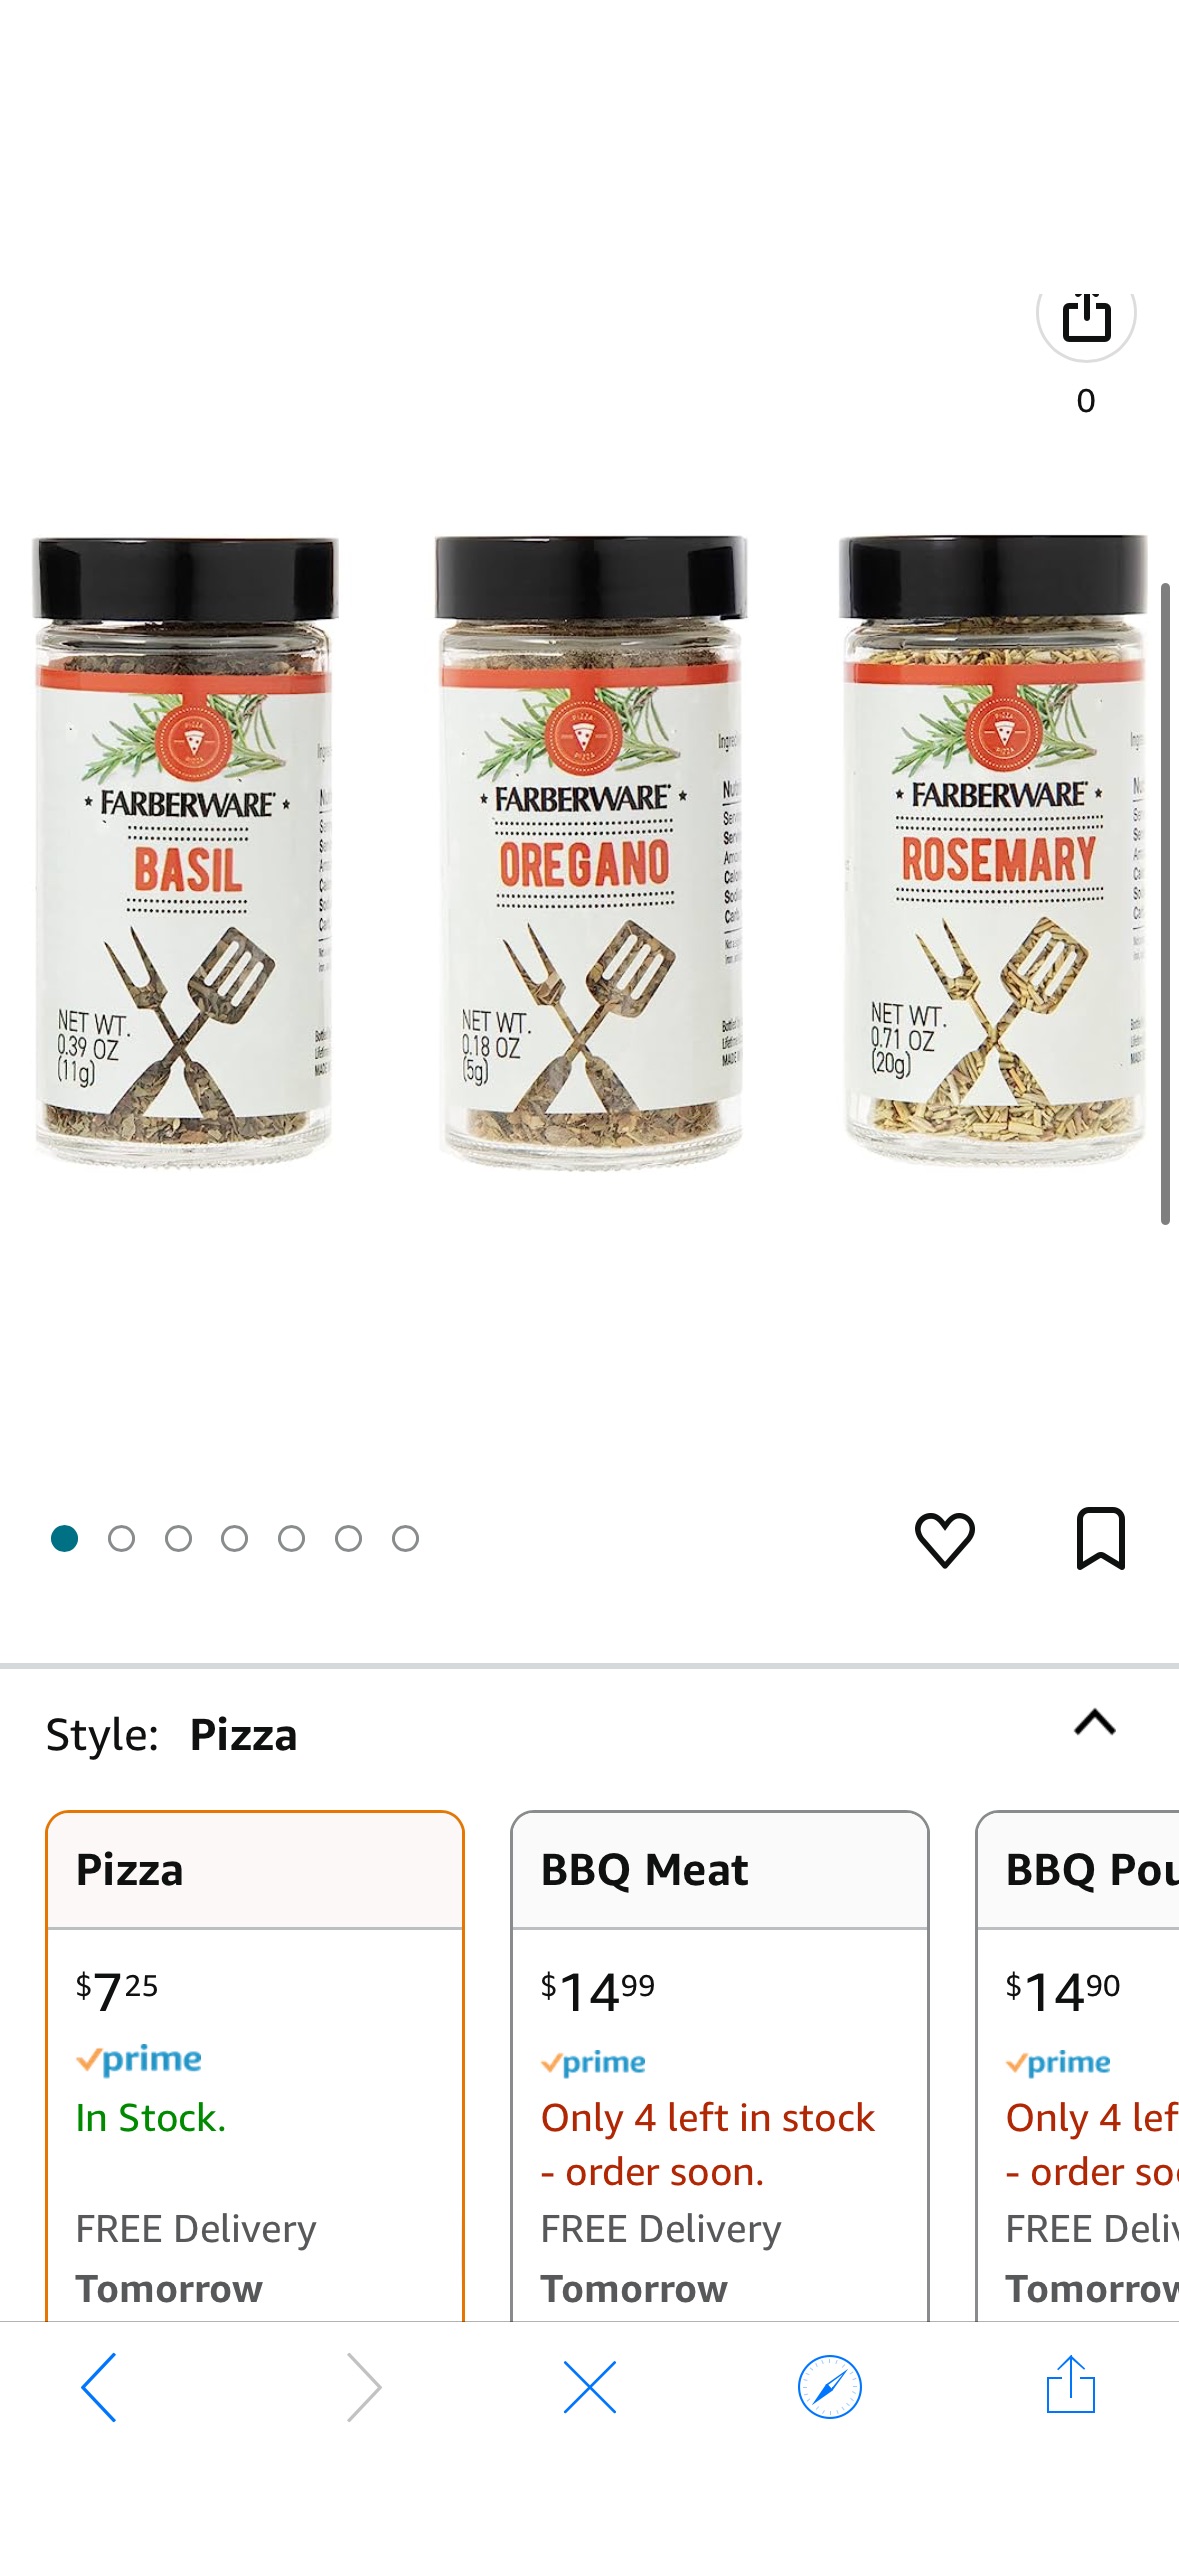 Amazon.com: Farberware Pizza Spice Blend Set (Basil, Oregano, Rosemary) In Glass Jars With Removable Sifter Caps For Sprinkling : Everything Else